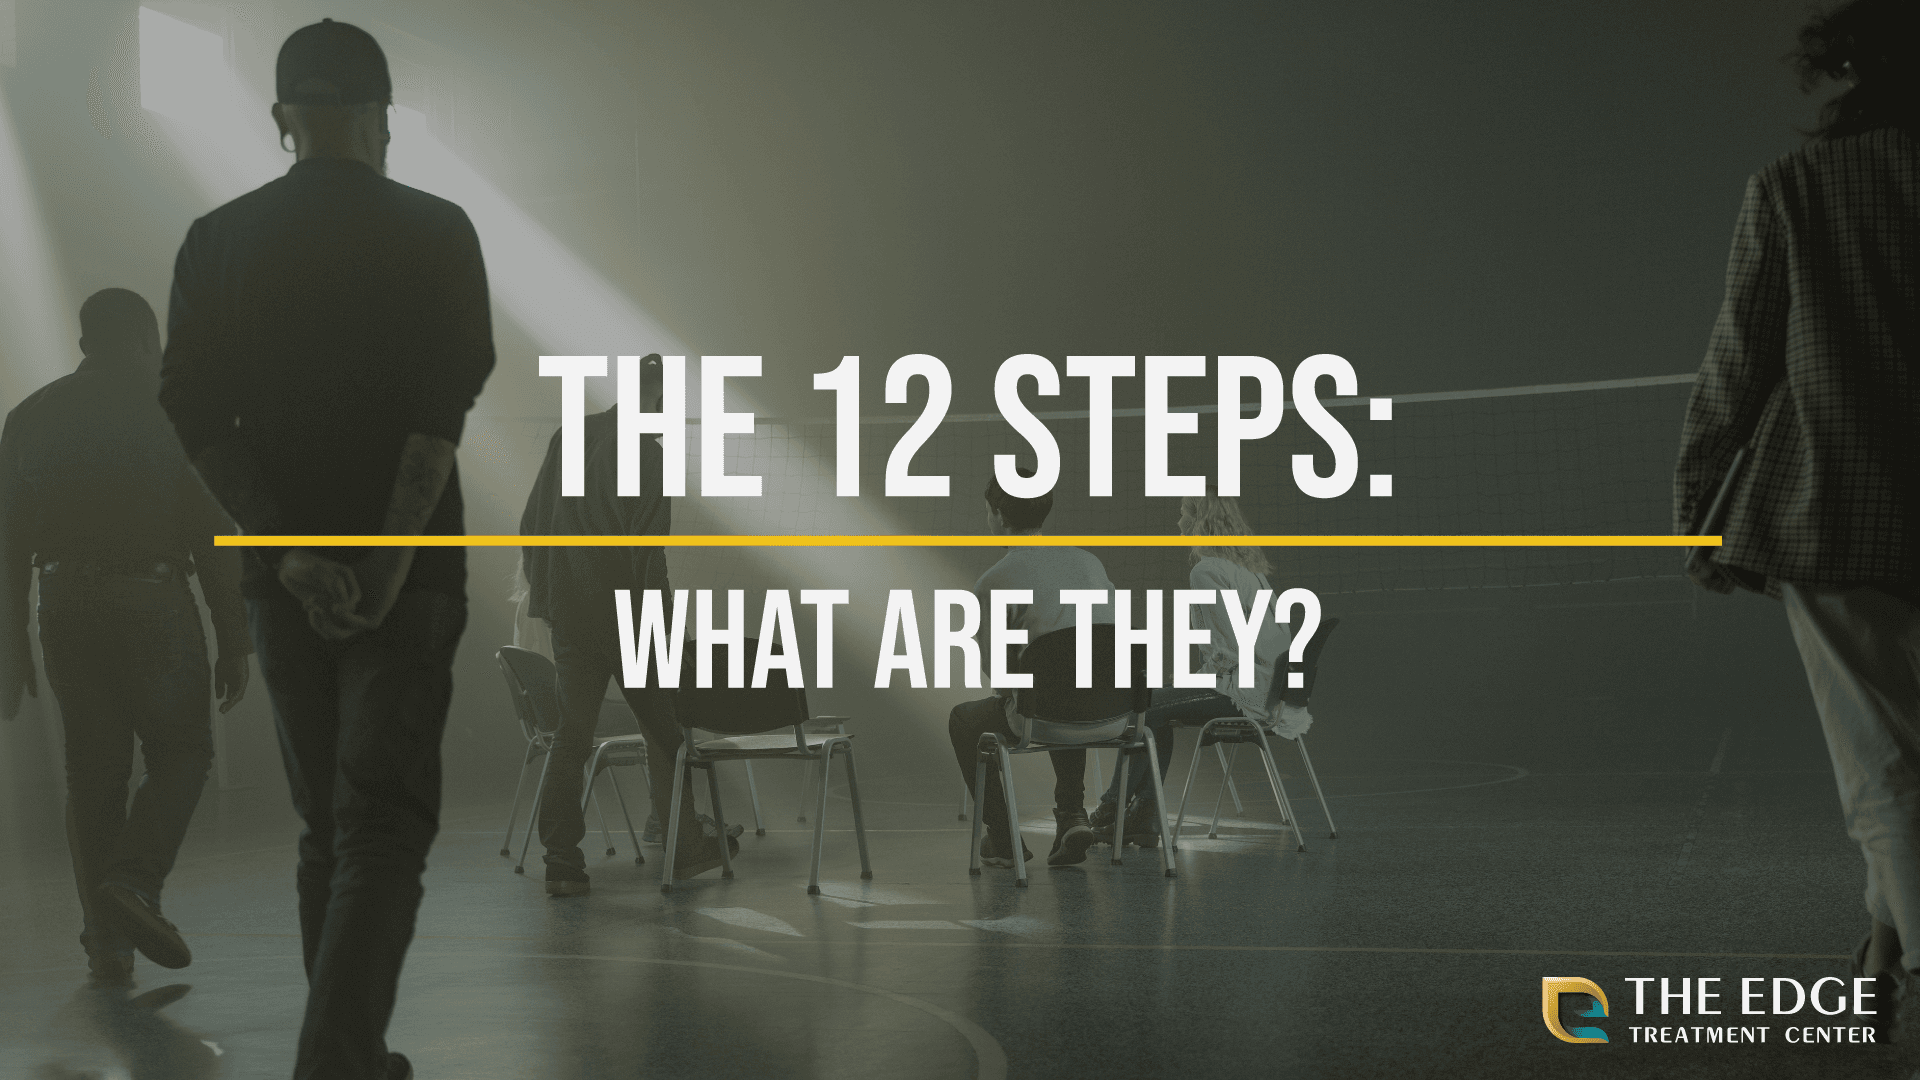 The 12 Steps of AA